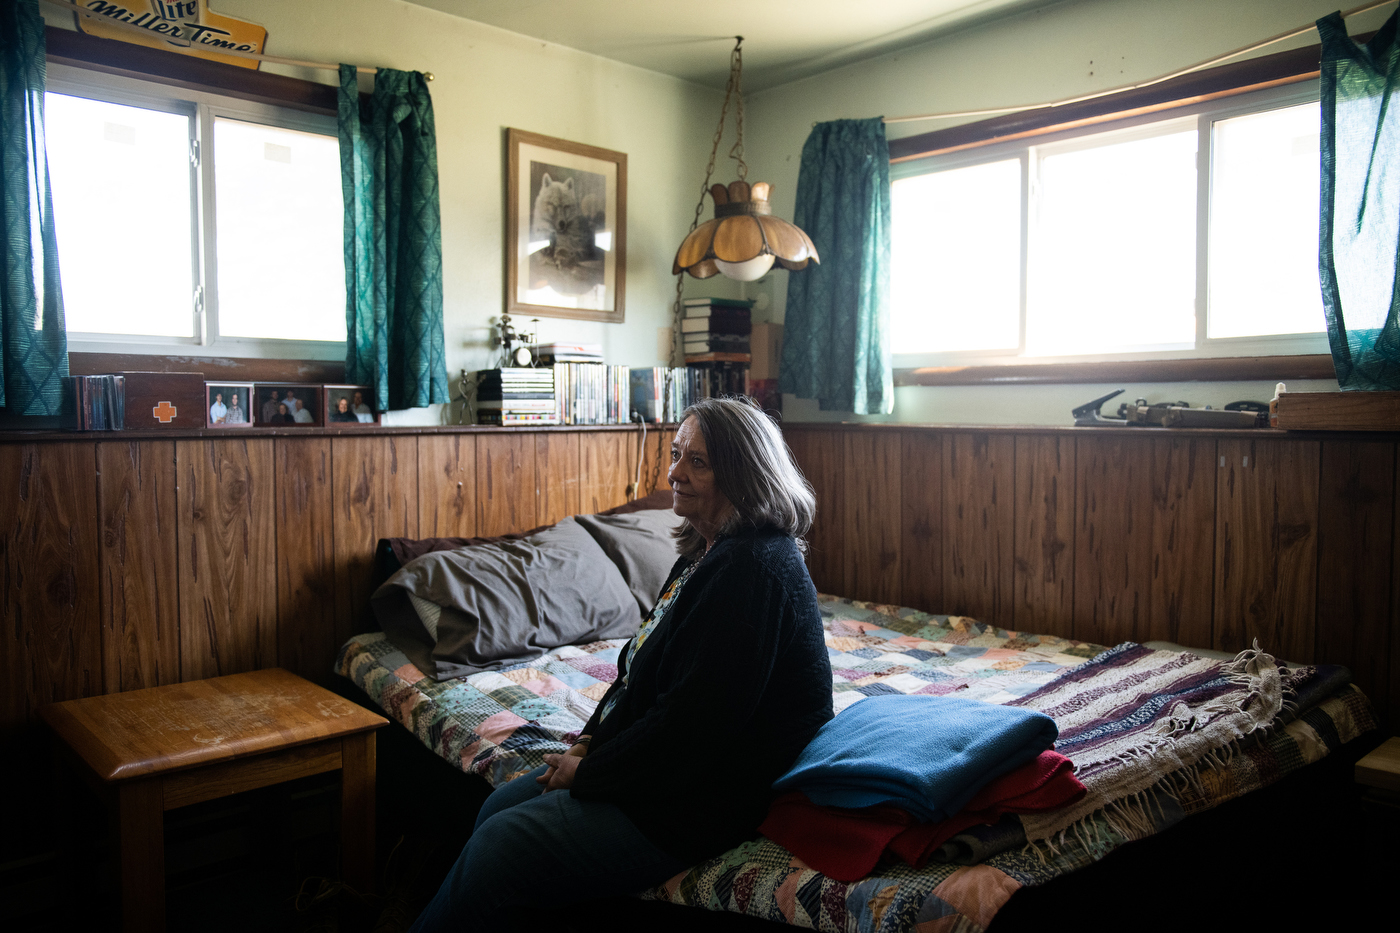  Portraits of Beth Hulm in her kitchen and the bedroom of her son Kyle Hulm in Bison, SD on October 20, 2018. Kyle Hulm, at 33 died of an assumed suicide in Dickinson, ND after a 21 year struggle with mental health issues. 